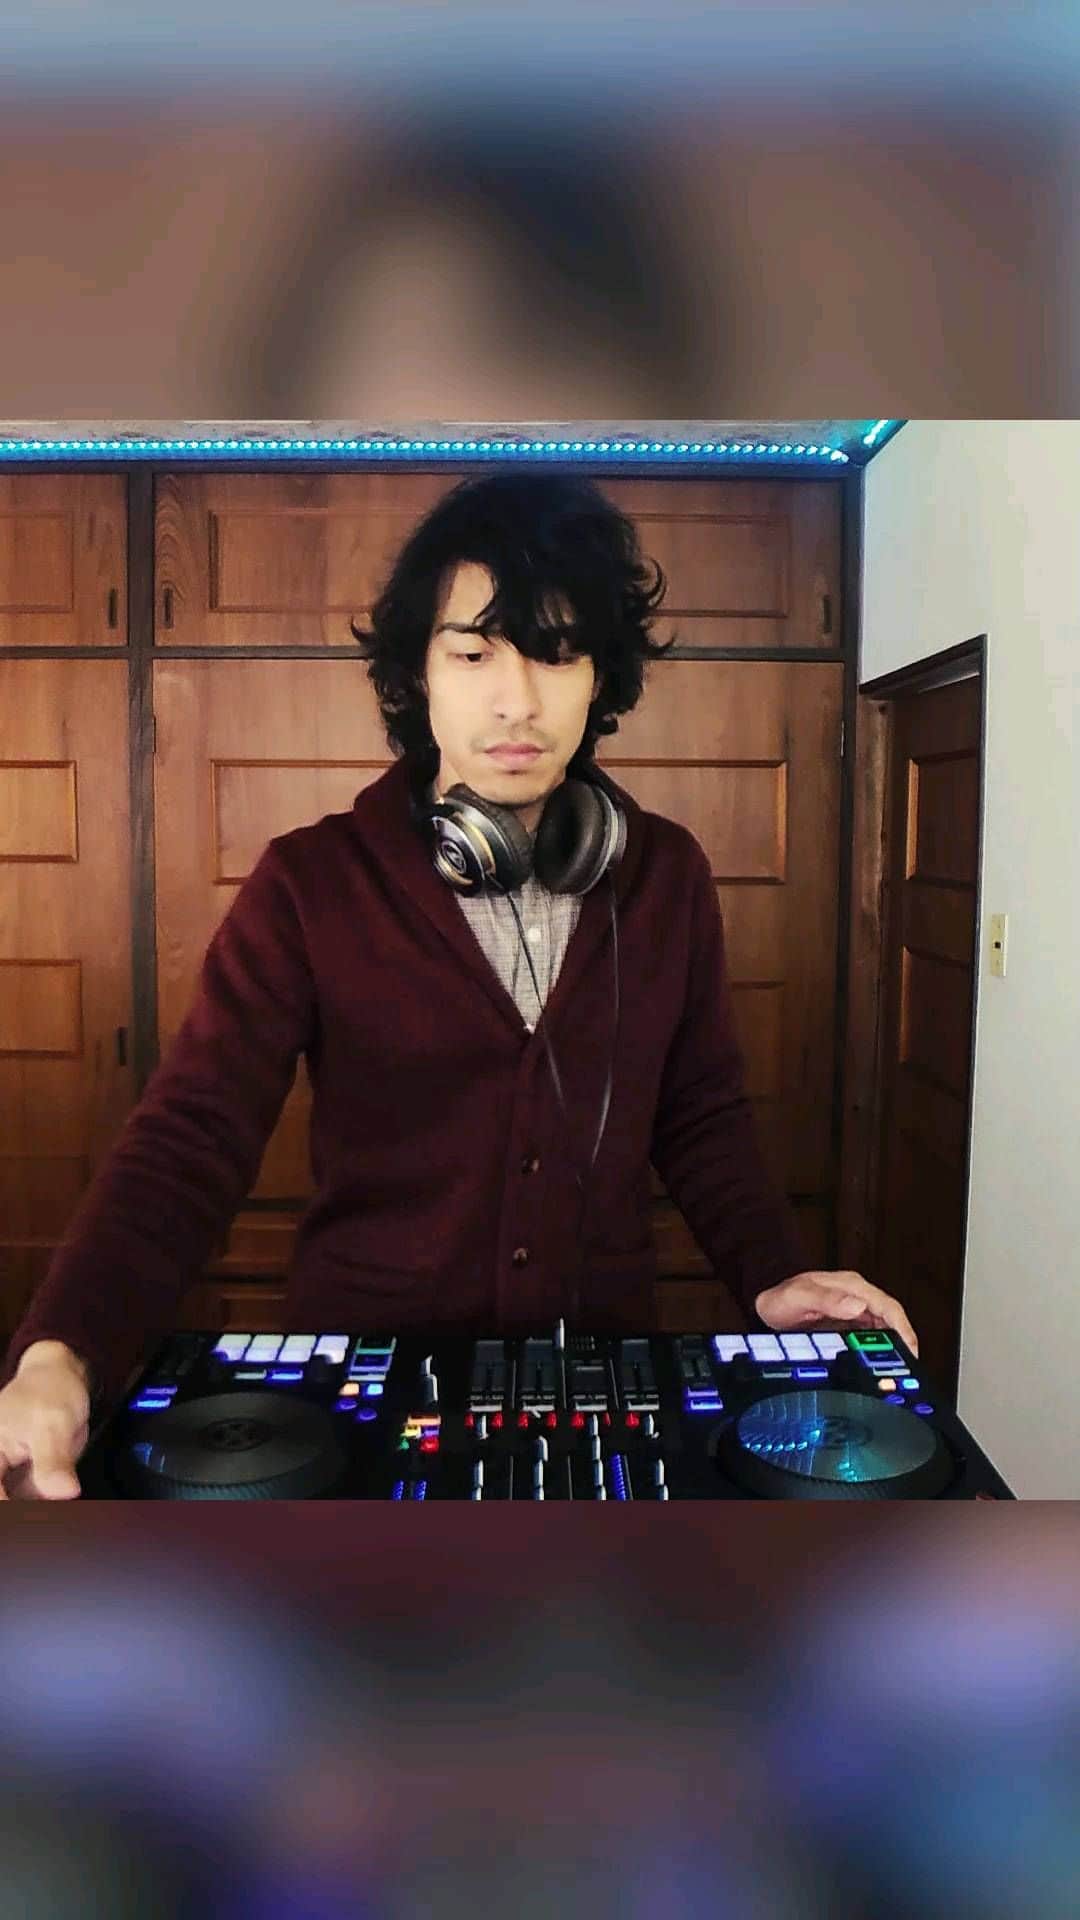 Terry Birdのインスタグラム：「New DJ mix video, 2nd part of the series. This should be good for people who are listening to Joris Voorn, Ben Bohmer, Le Youth or any artists in melodic house genre 🔥 I love chill sounds, calm feeling, beautiful melodies, dramatic build ups in this genre ;) Hope you guys enjoy it! The full version is available on my YouTube channel! . 前回の続きです！ ドラマティックな展開で美しいメロディが特徴的なジャンルの曲を選びました👍 フルバージョンはYouTubeで公開中！ . #progressivehouse #progressivehousemusic #progressivehousedj #melodichouse #melodichousemusic #melodictechnomusic #melodictechnolovers #djmix #techno #deephouse #techhouse #housemusic #deeptech #melodictechno #dj #afrohouse #dancemusic #edm #deephousemusic #beatport #minimaltechno #technopeople #trance #tribalhouse #housemusicdj #synthesizer #festival」